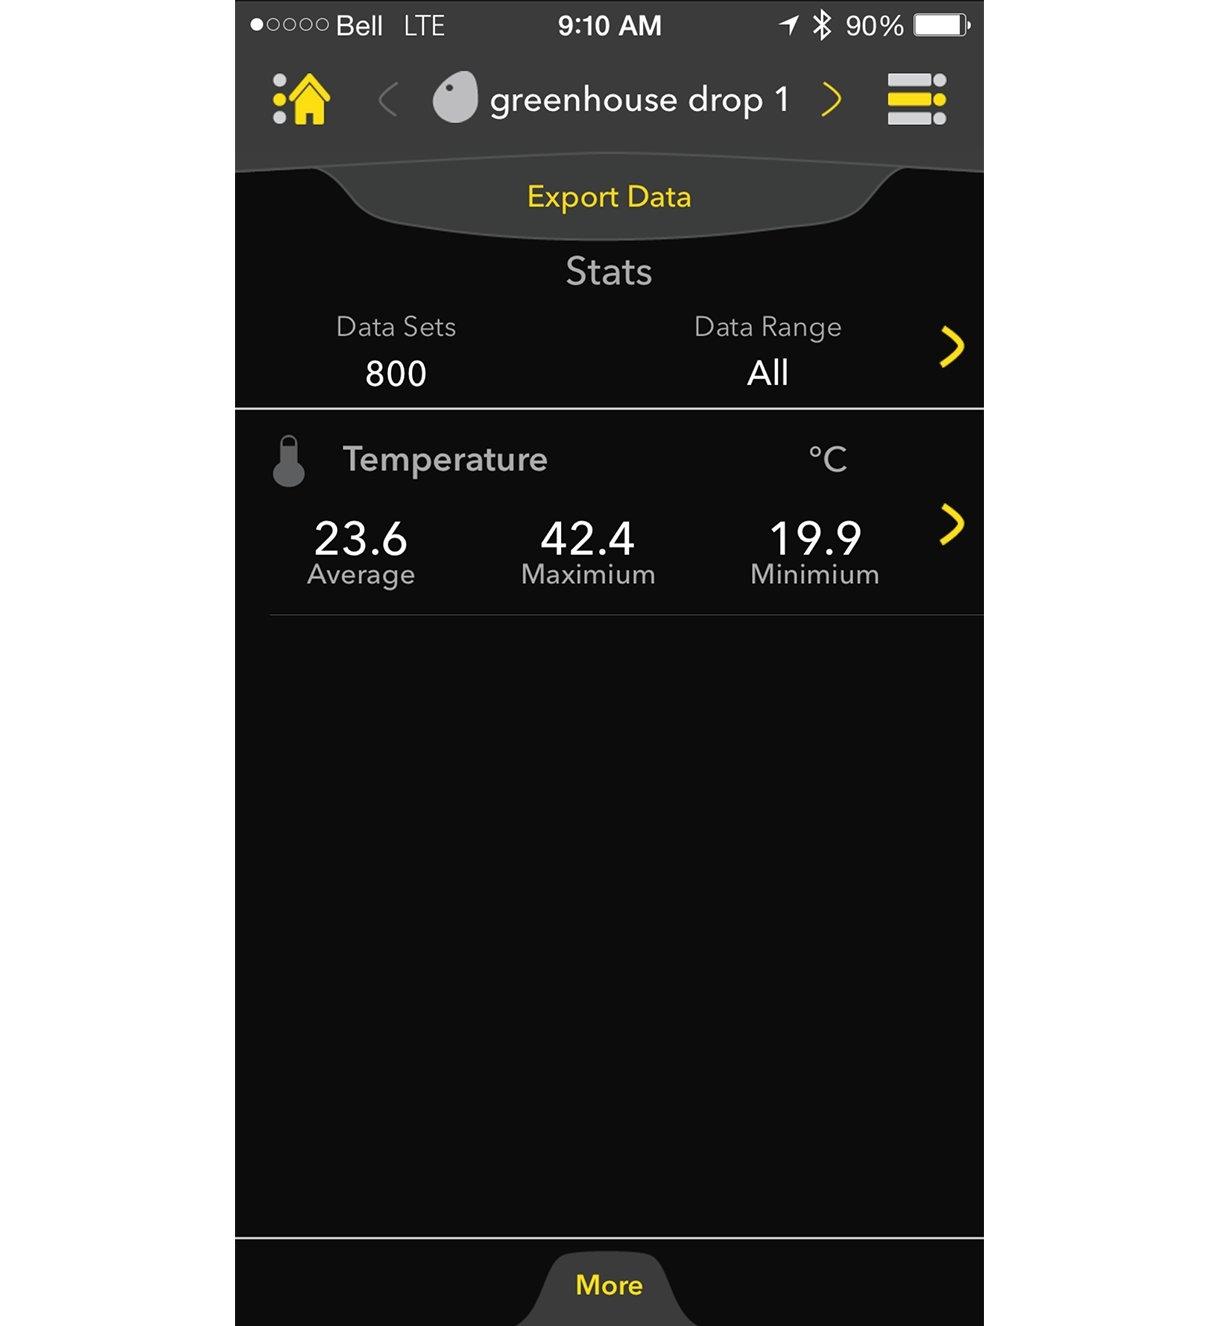 Example of stats on a smartphone screen